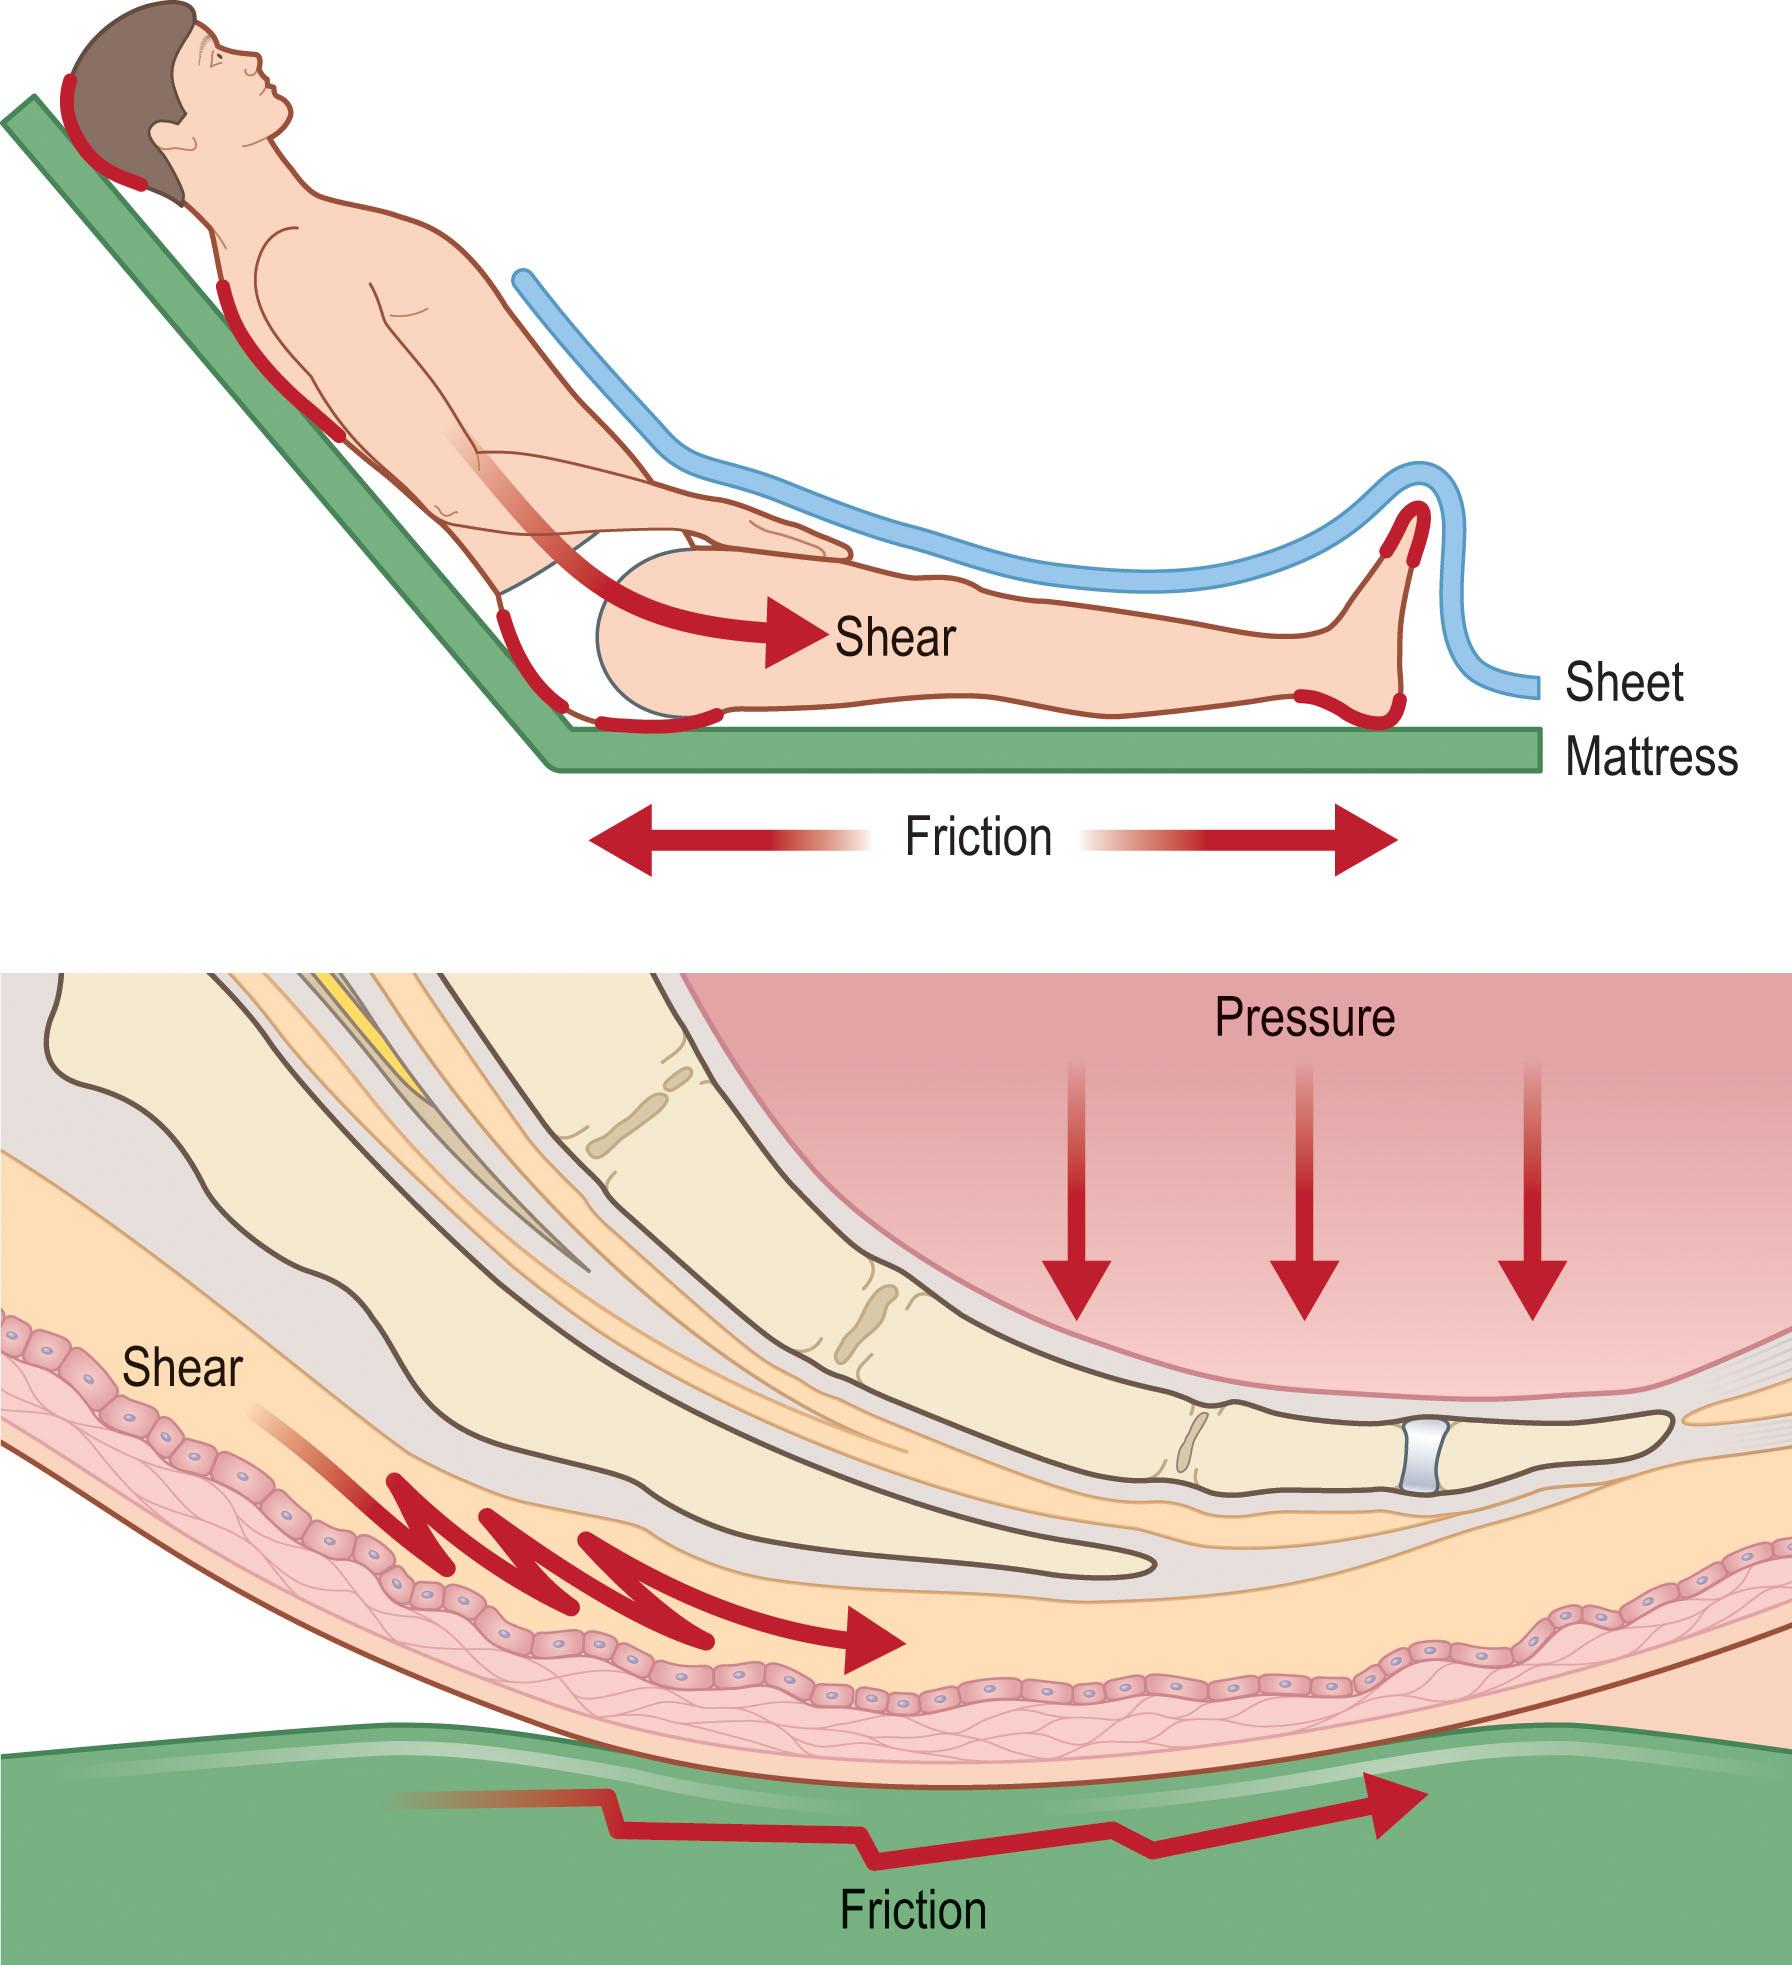 Figure 16.3, Pressure, shear, and friction are related but distinct forces which contribute to pressure sore development.